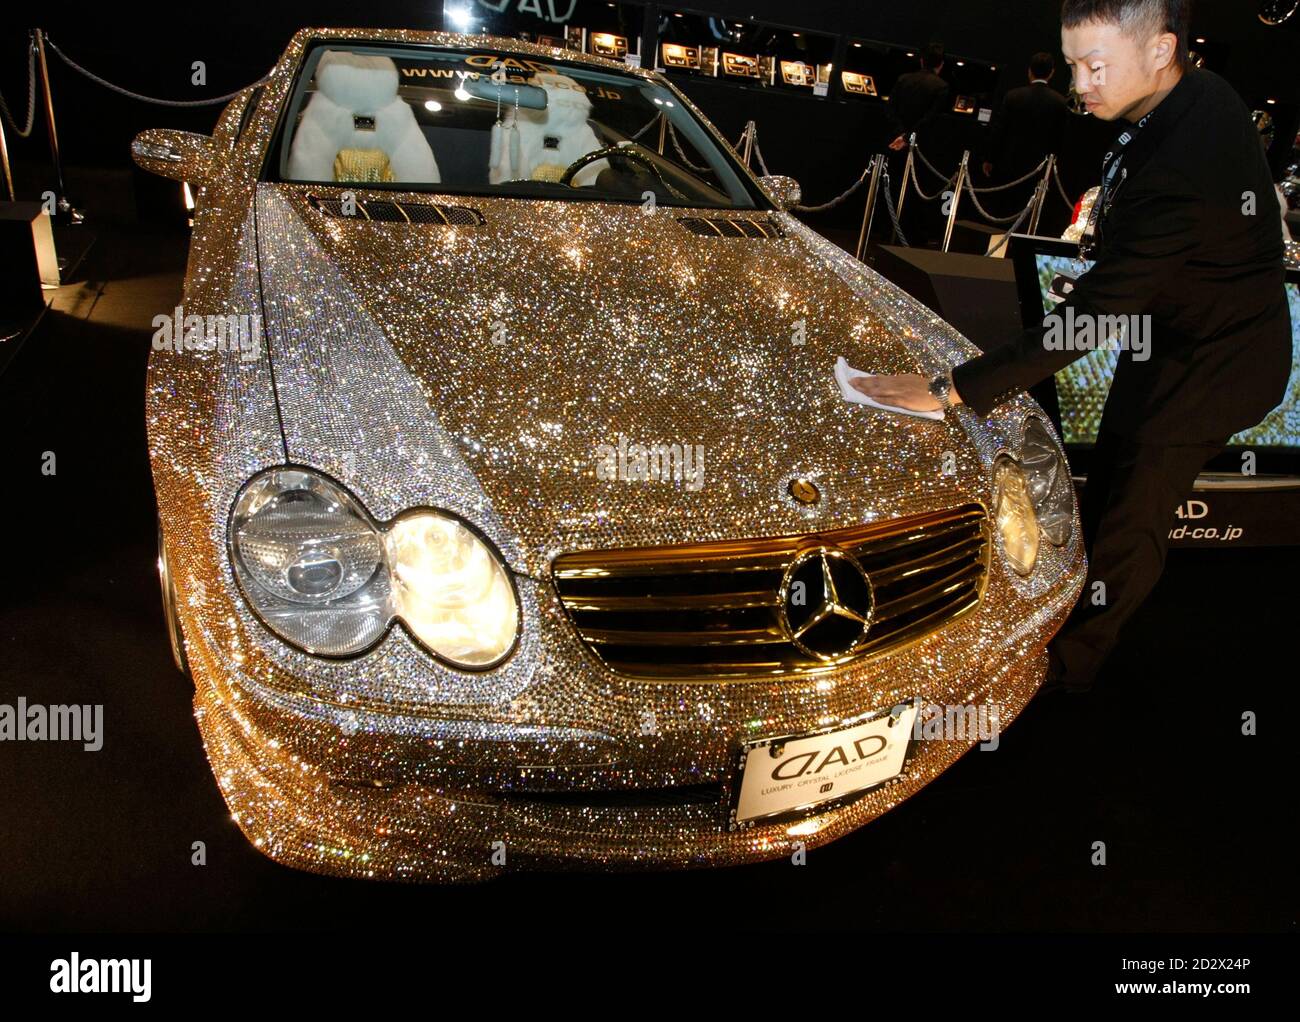 An exhibitor polishes the customized Mercedes-Benz SL600, Luxury Crystal  Benz, studded with 300,000 Swarovski crystal glass, displayed at the  pavilion of custom car accessory company Garson/D.A.D at Tokyo Auto Salon  2009 at